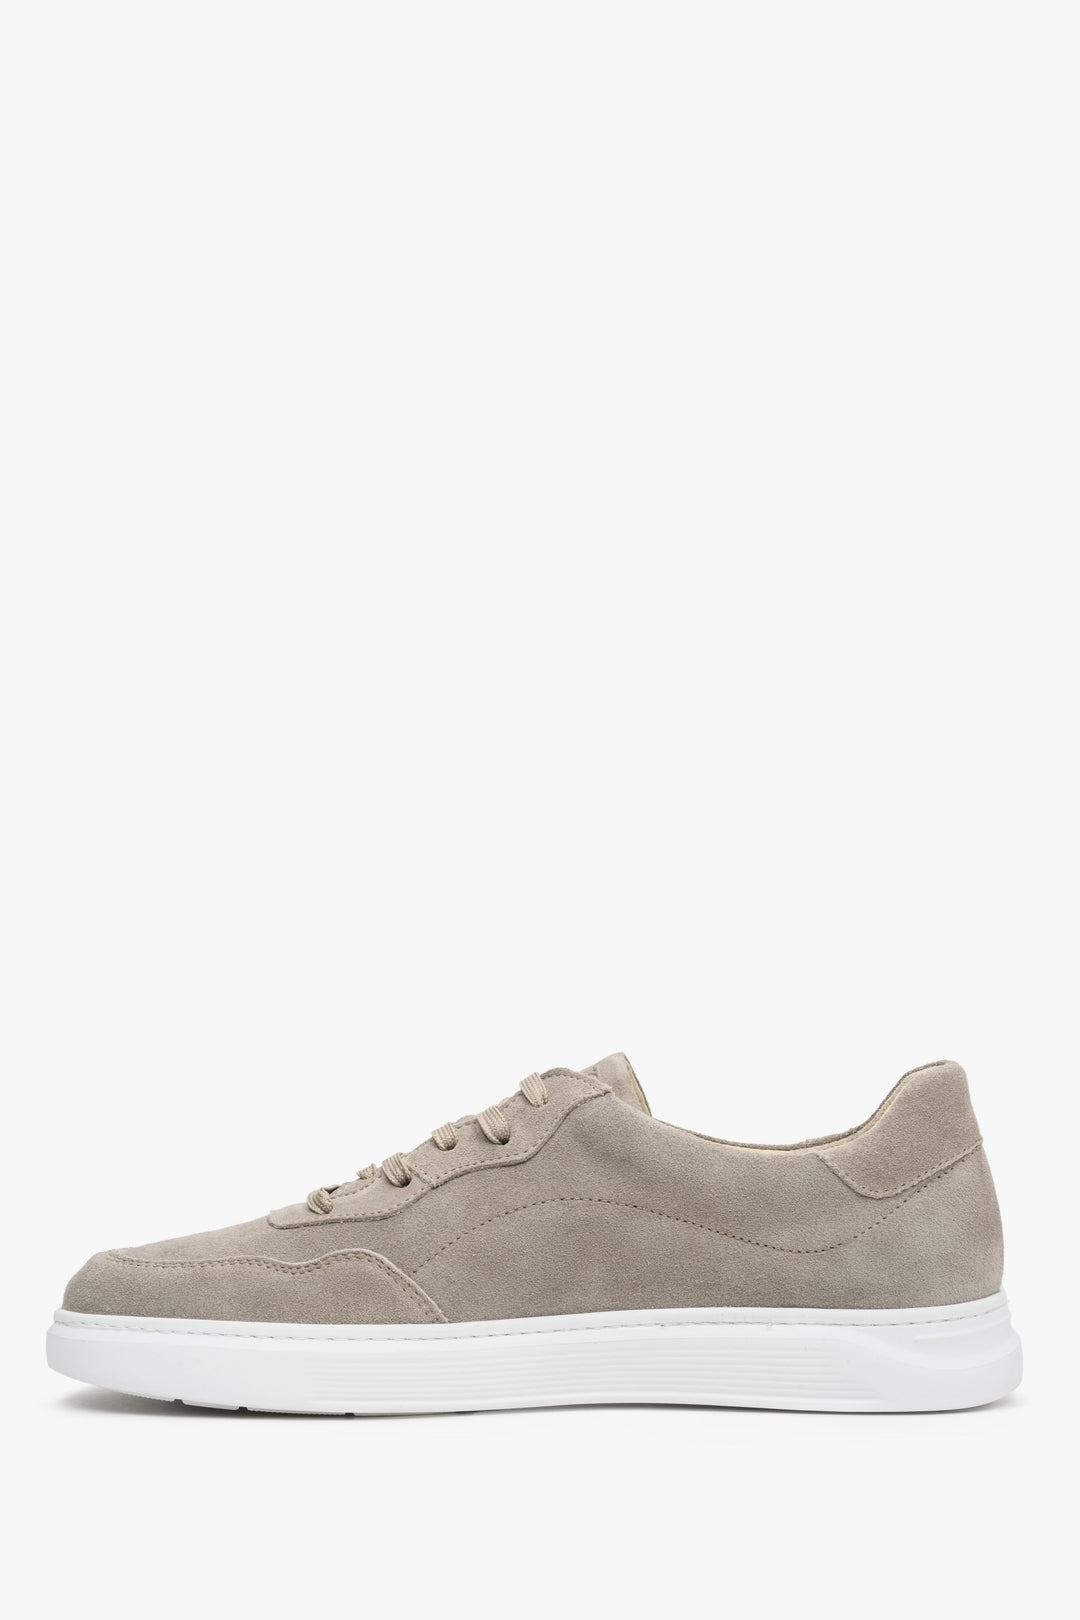 Men's sneakers made of natural velour in grey color, laced.